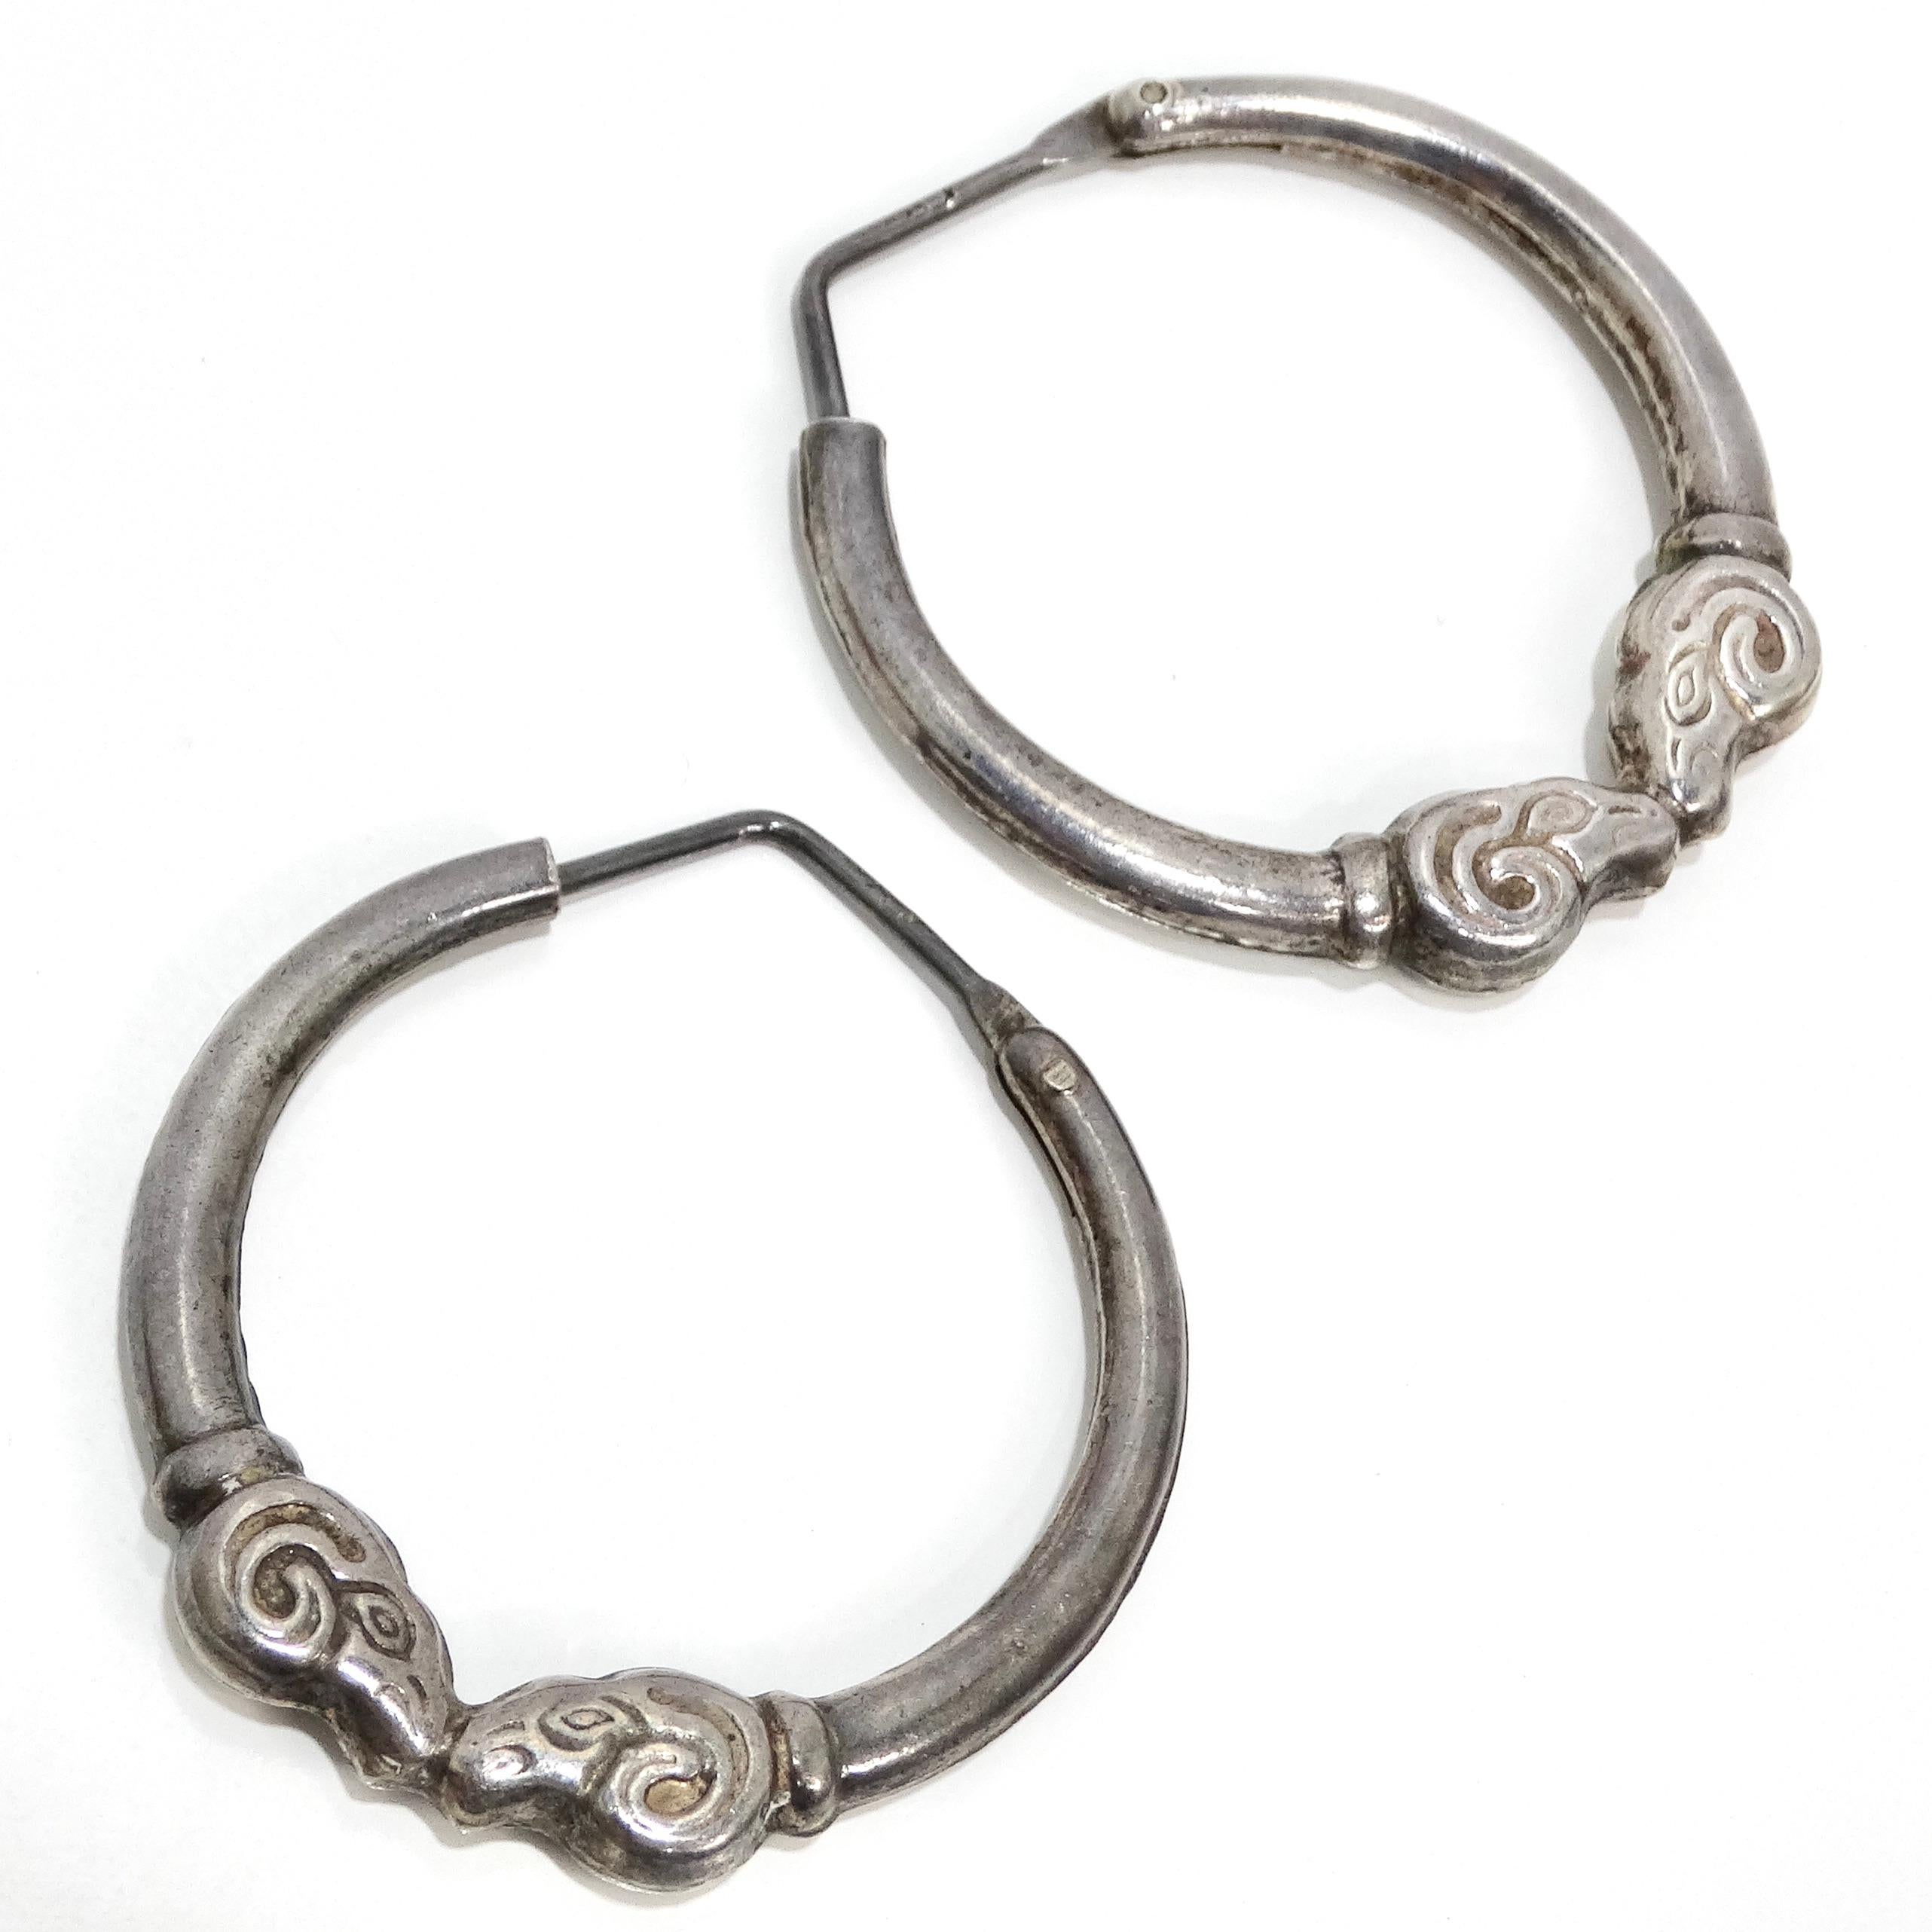 Introducing the exquisite 1970s Sterling Silver Double Ram Hoop Earrings, a vintage treasure that exudes timeless elegance and unique craftsmanship. Crafted from sterling silver, these hoop earrings feature a stunning double ram head etched into the